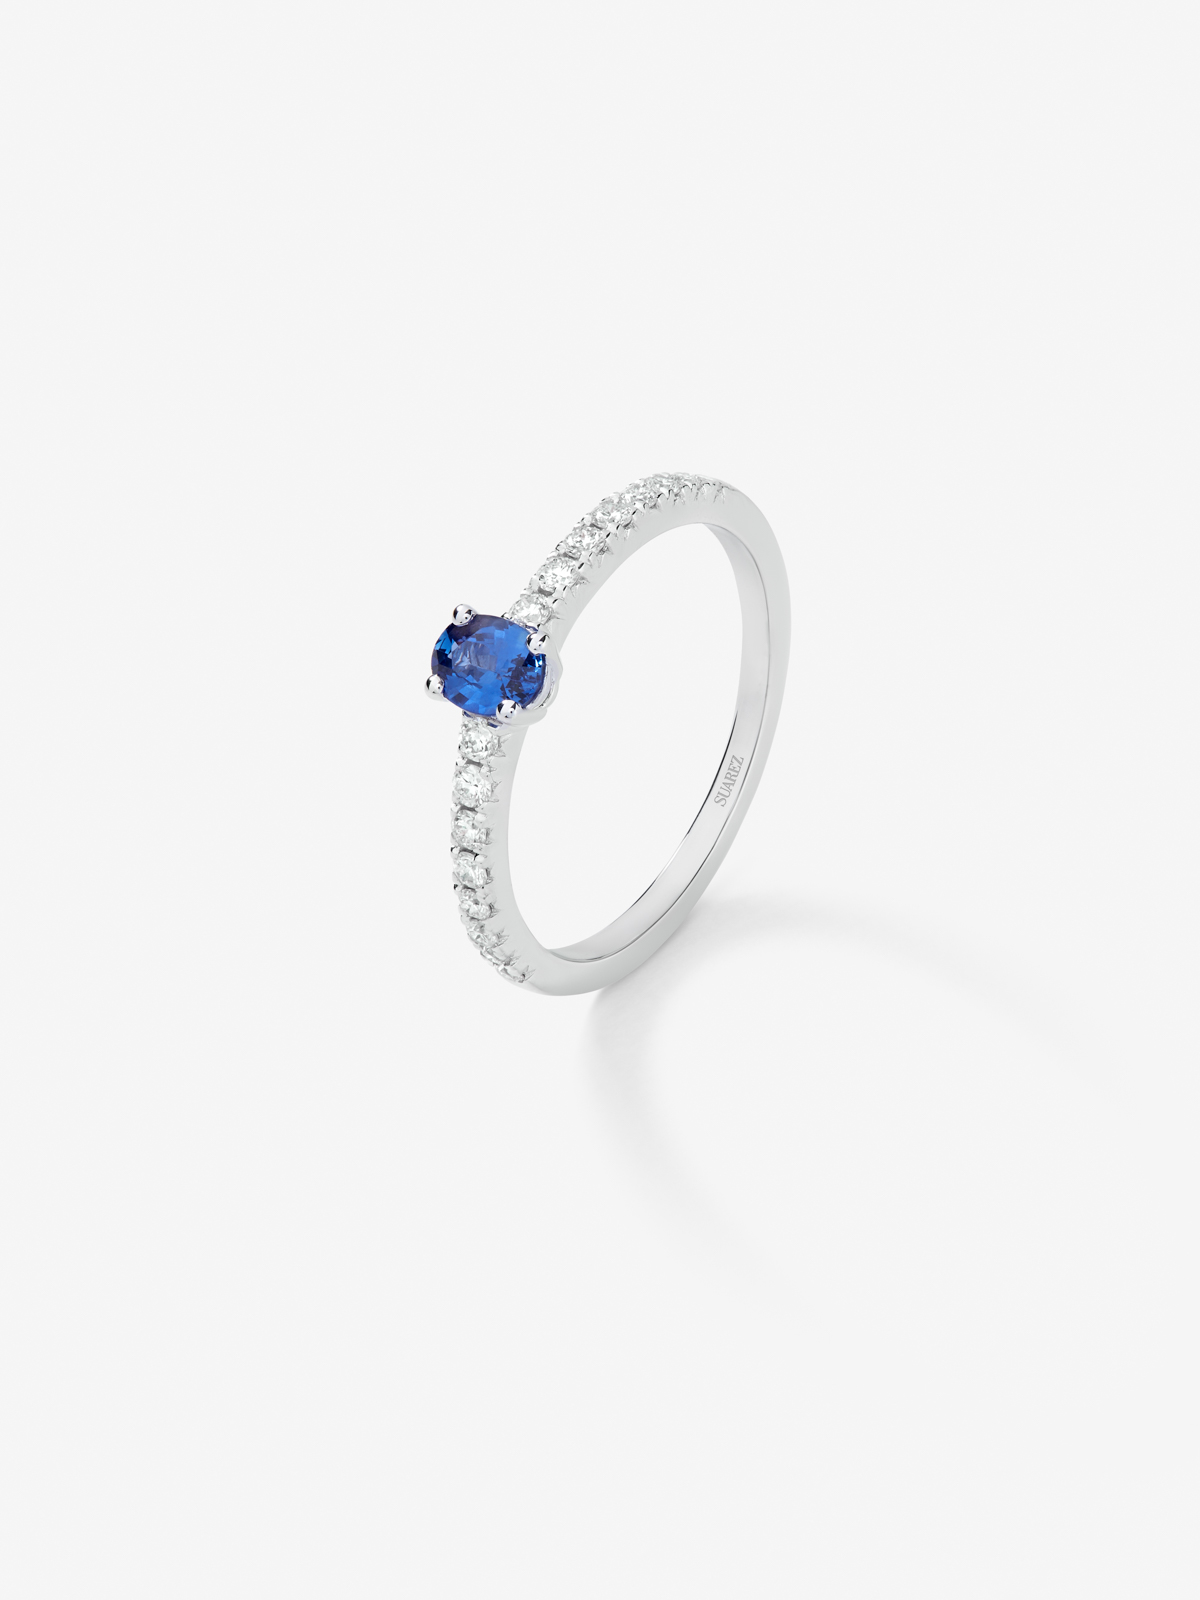 18K White Gold Ring with Blue Zafiro in 0.3 cts and white diamonds in 0.2 cts bright diamonds